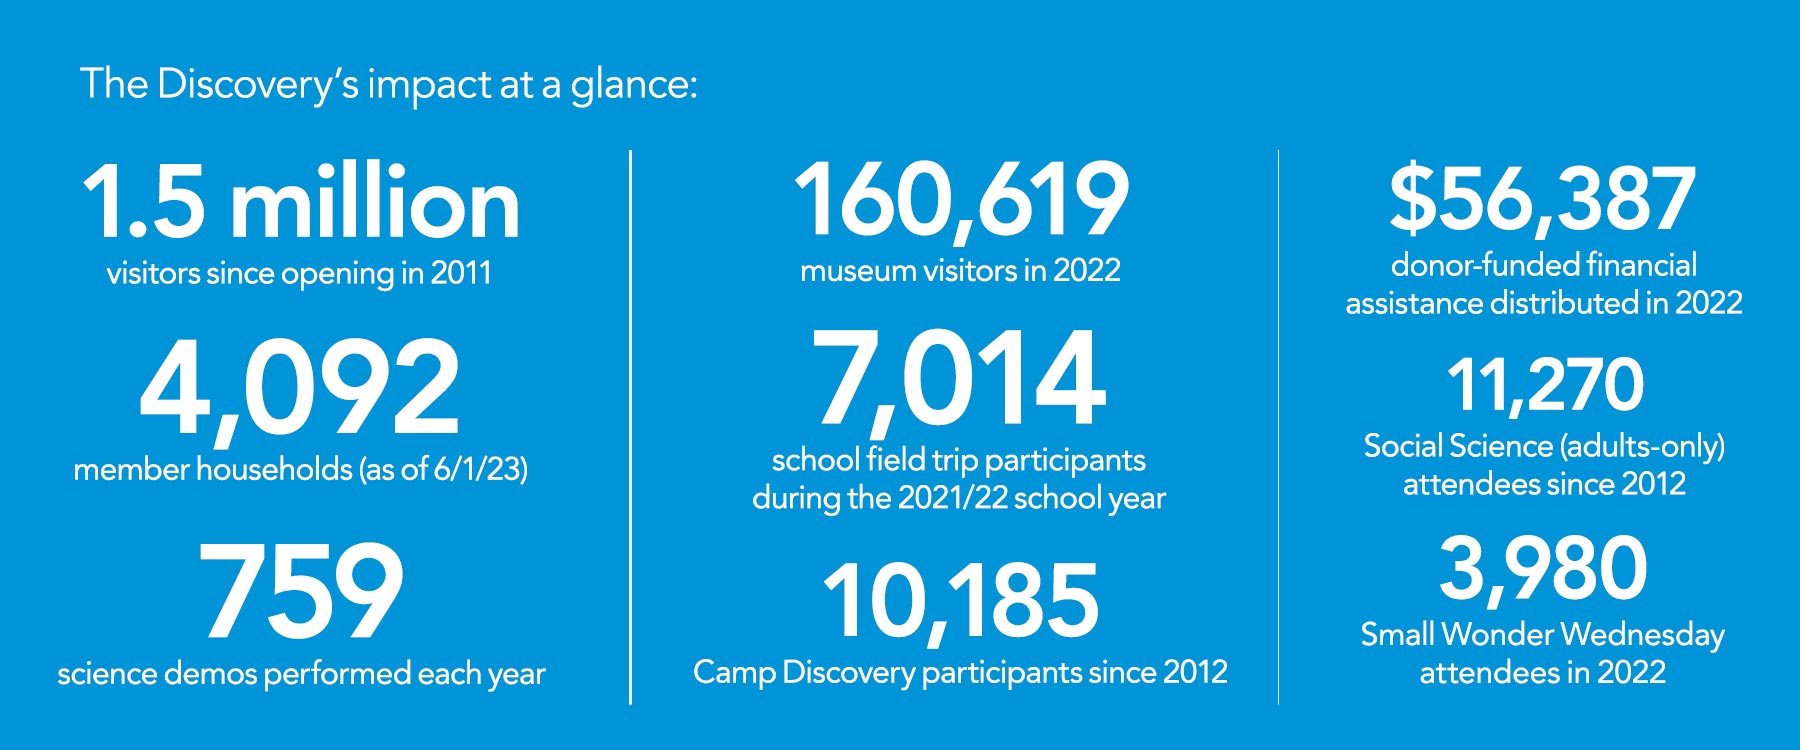 The Discovery’s Impact at a Glance 6-1-23